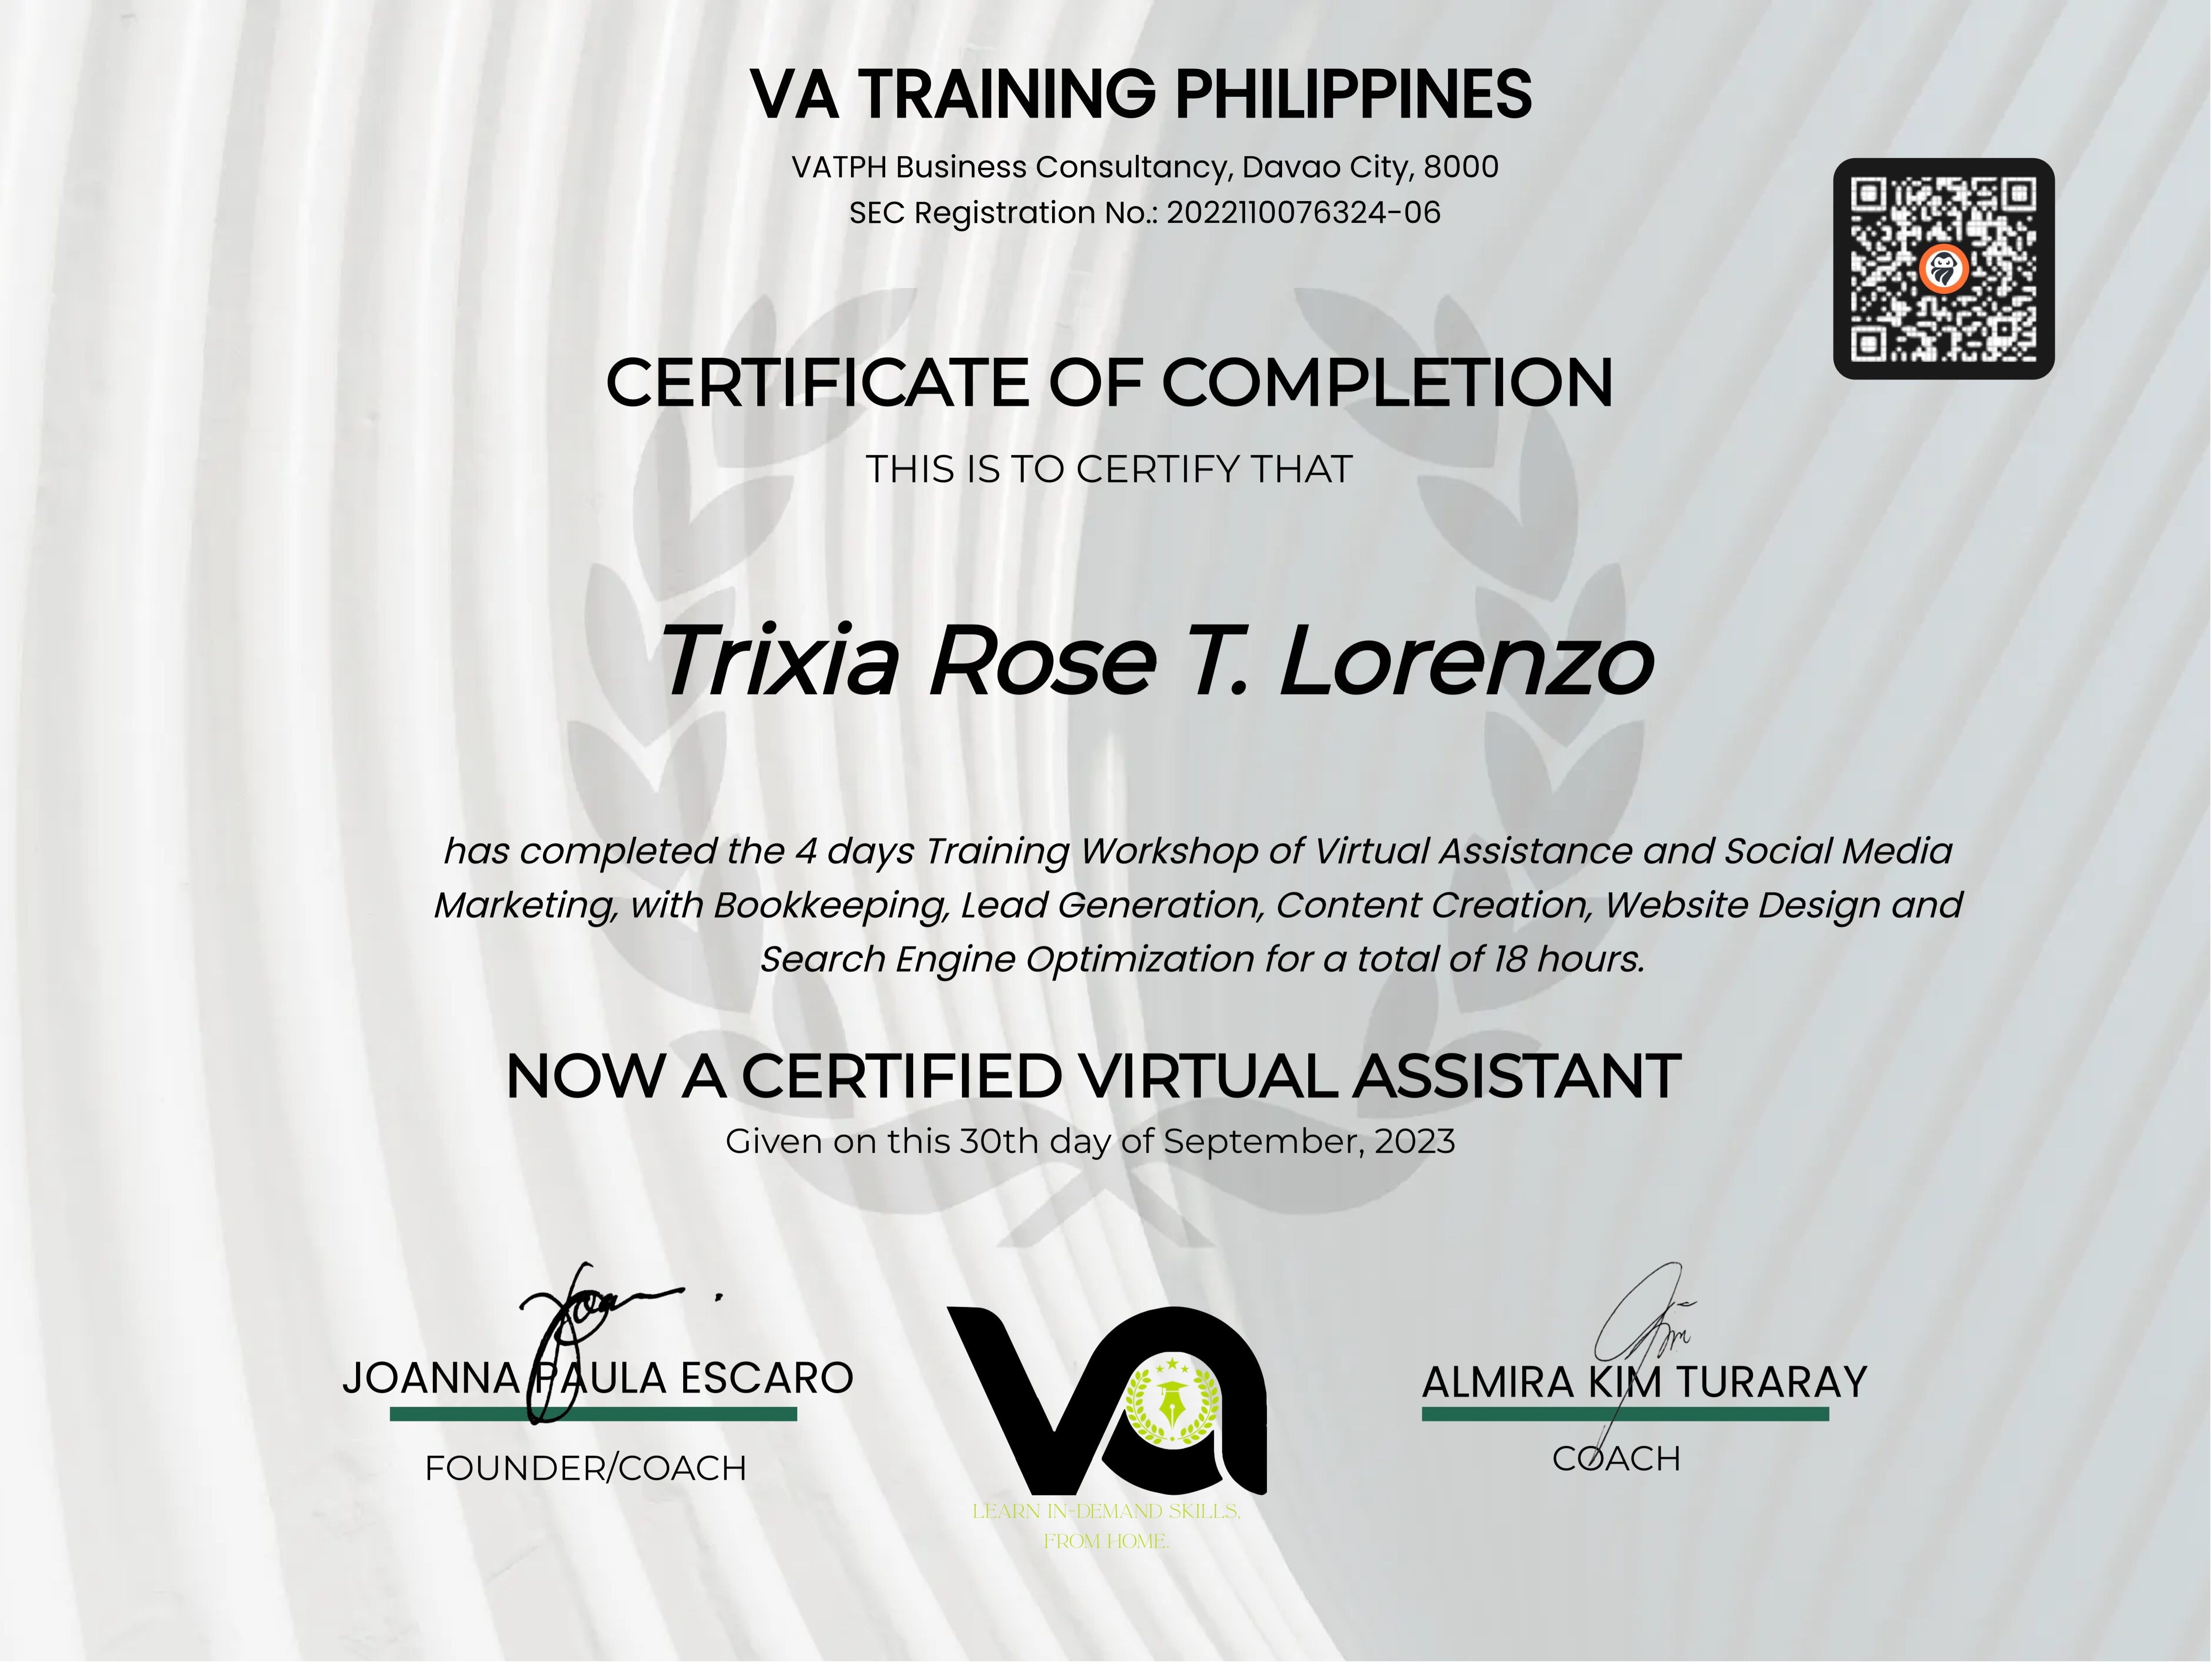 Virtual Assistance and Social Media Training